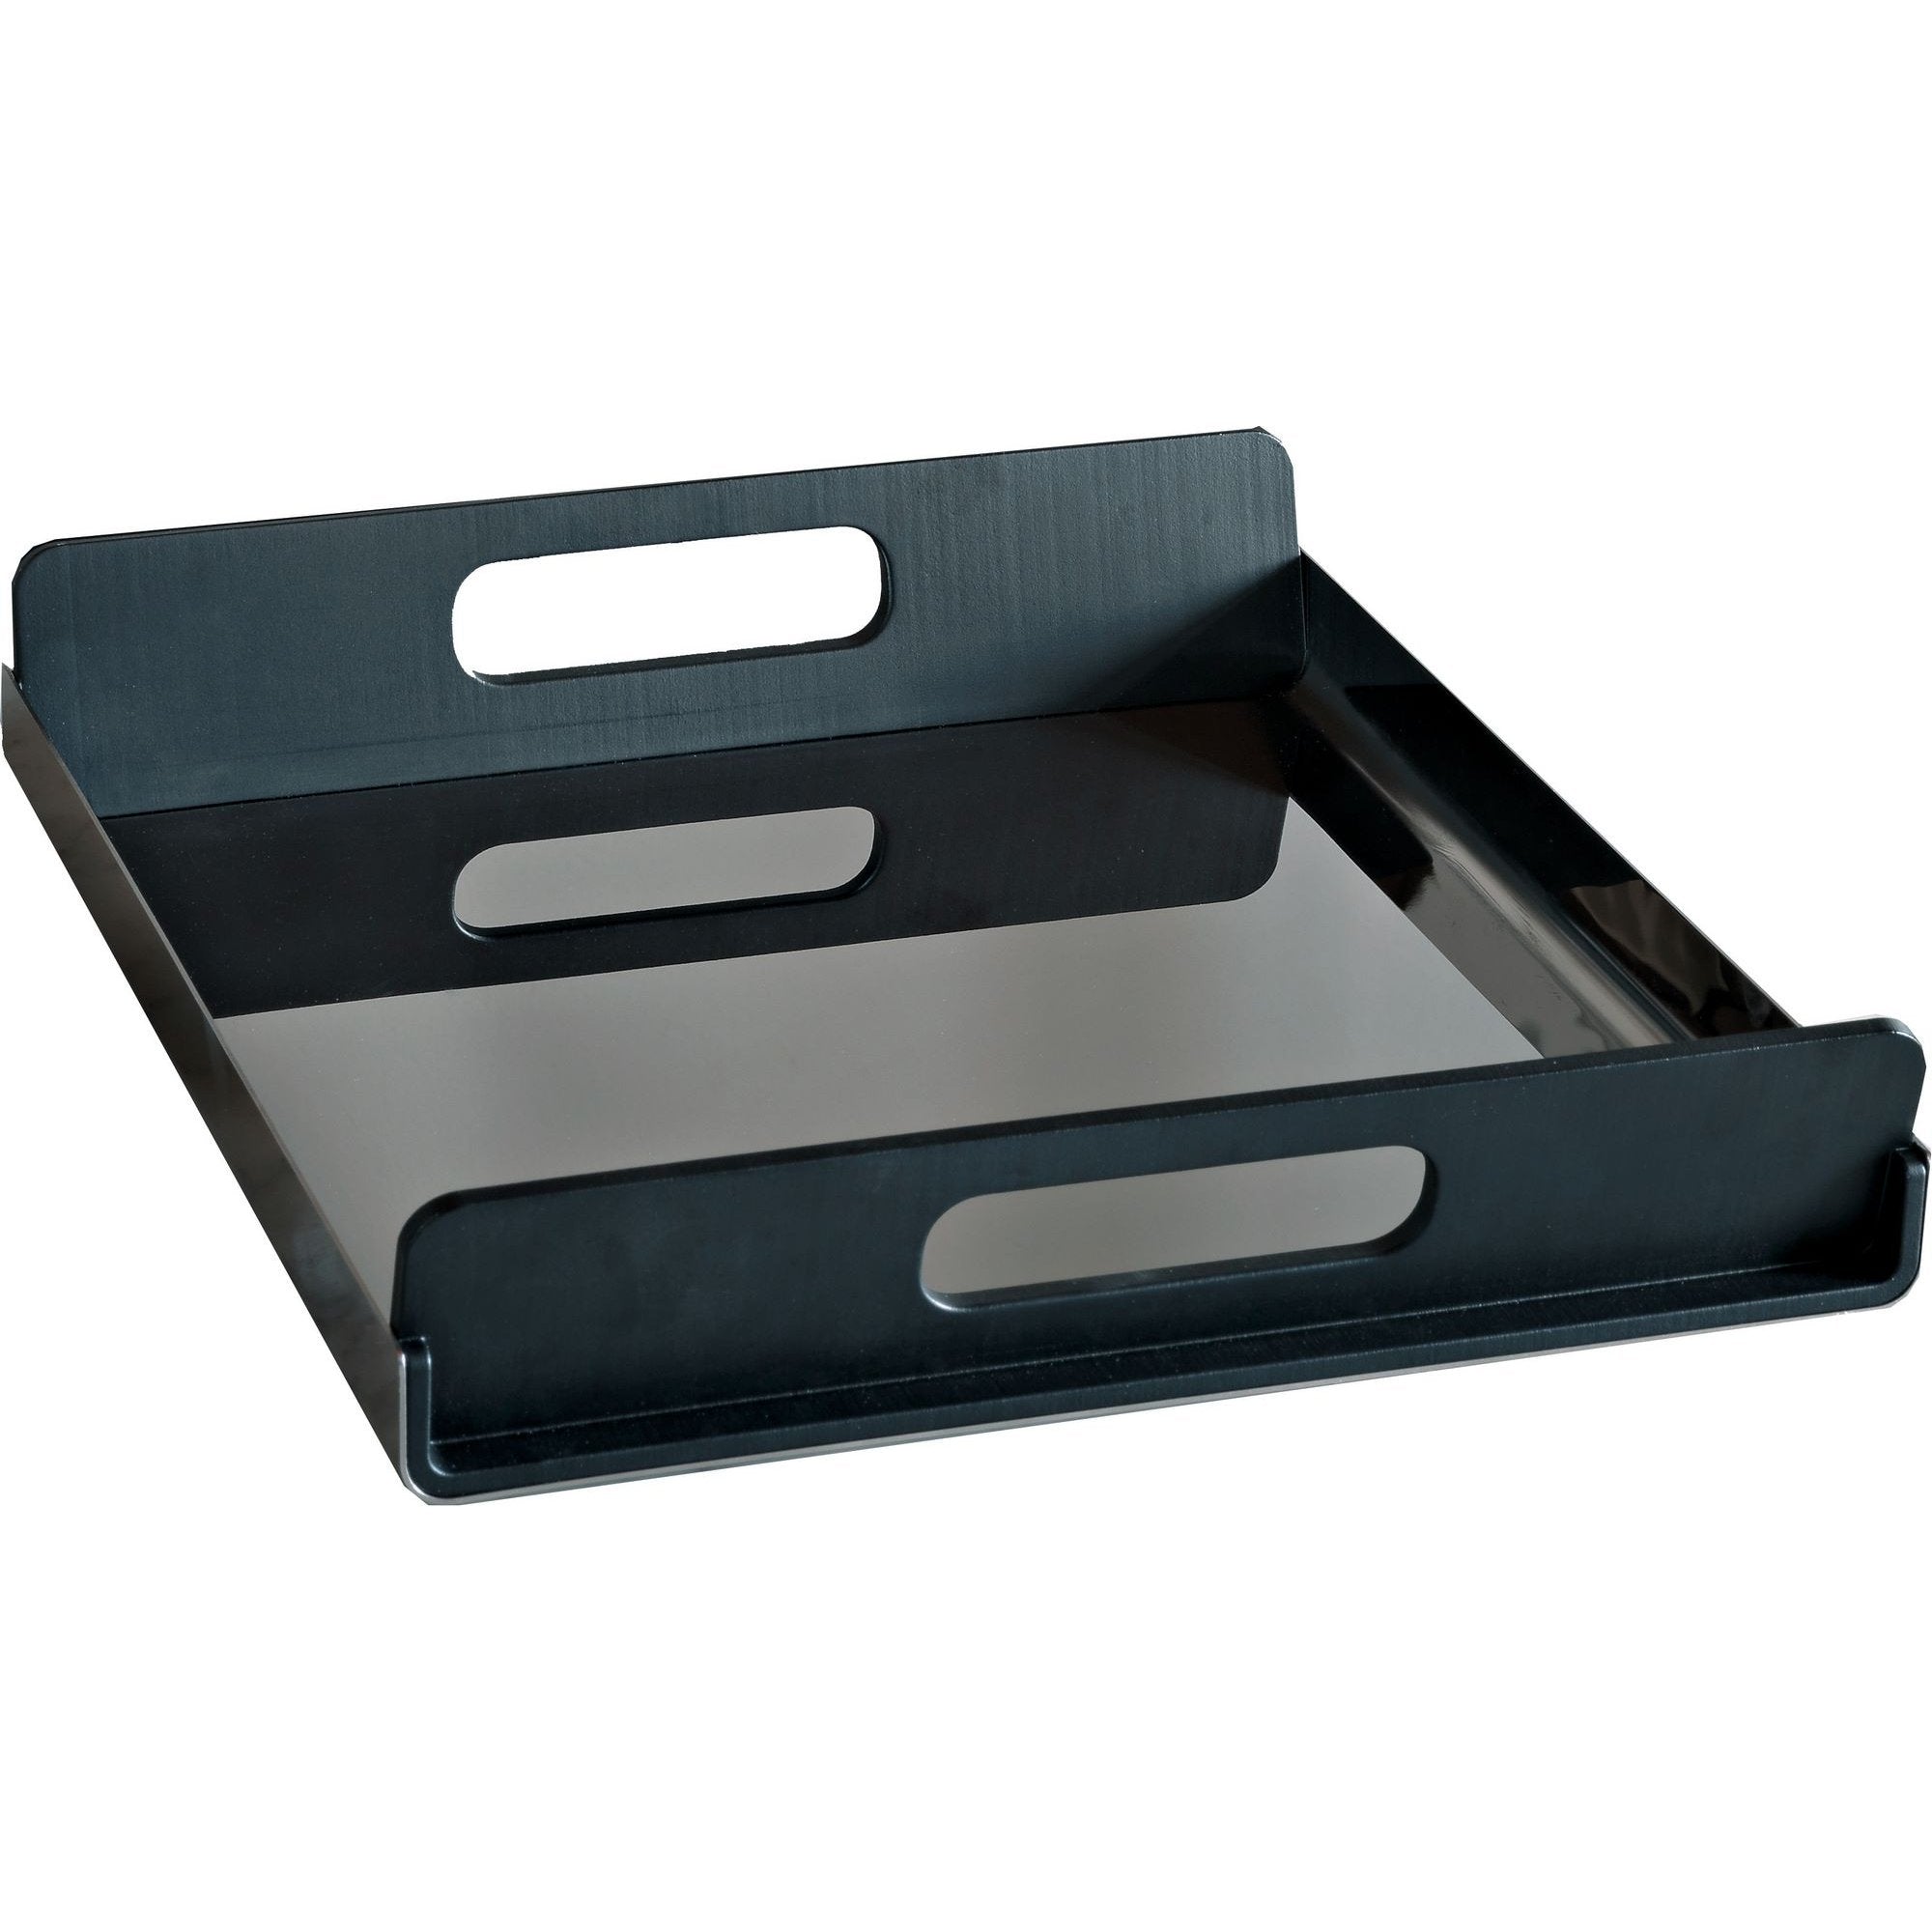 GIA01/45 Rectangular tray with handles - Vassily